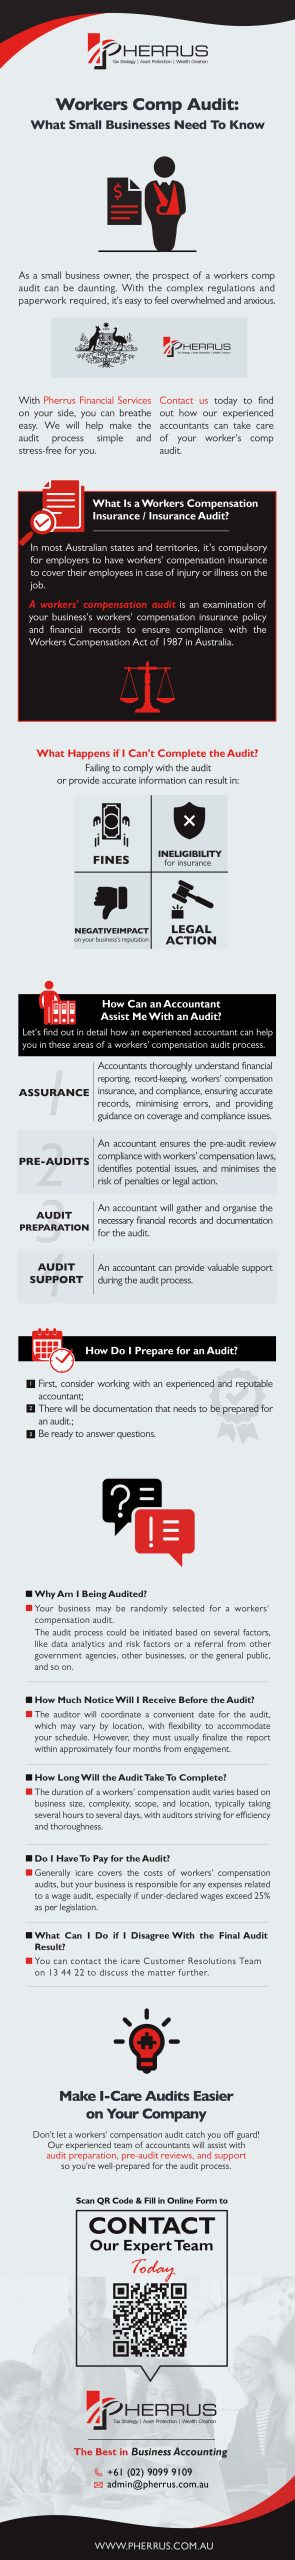 Workers Comp Audit Infographic